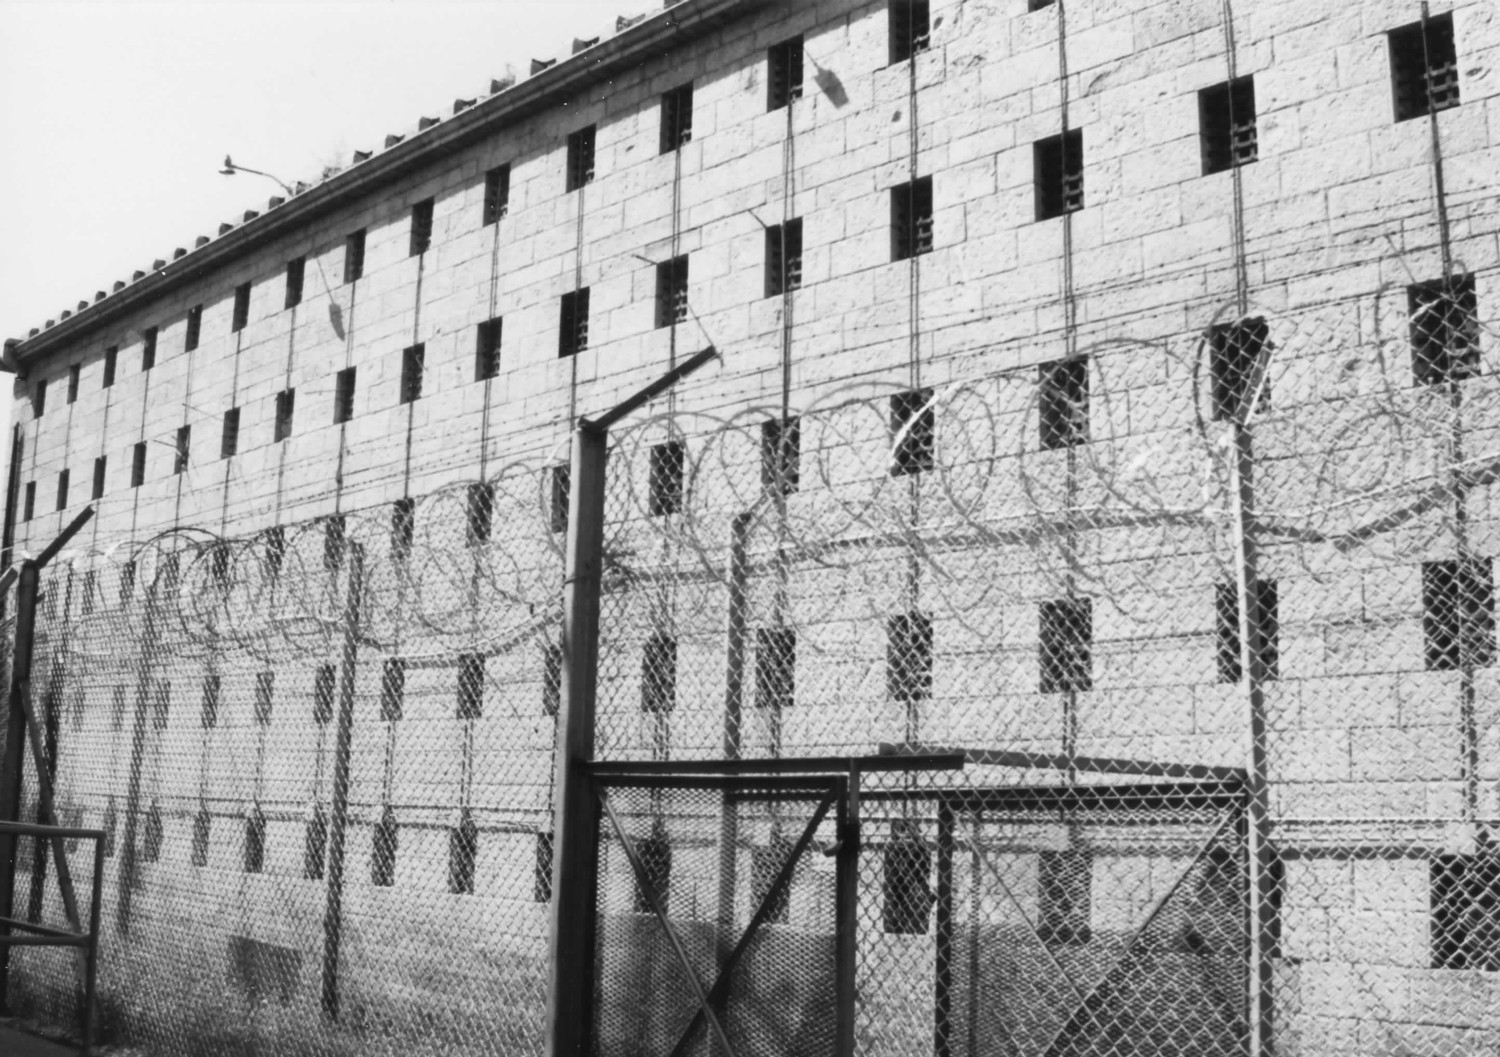 South Carolina Penitentiary - Central Correctional Institution, Columbia South Carolina East facade of North Wing Cell Block (1994)